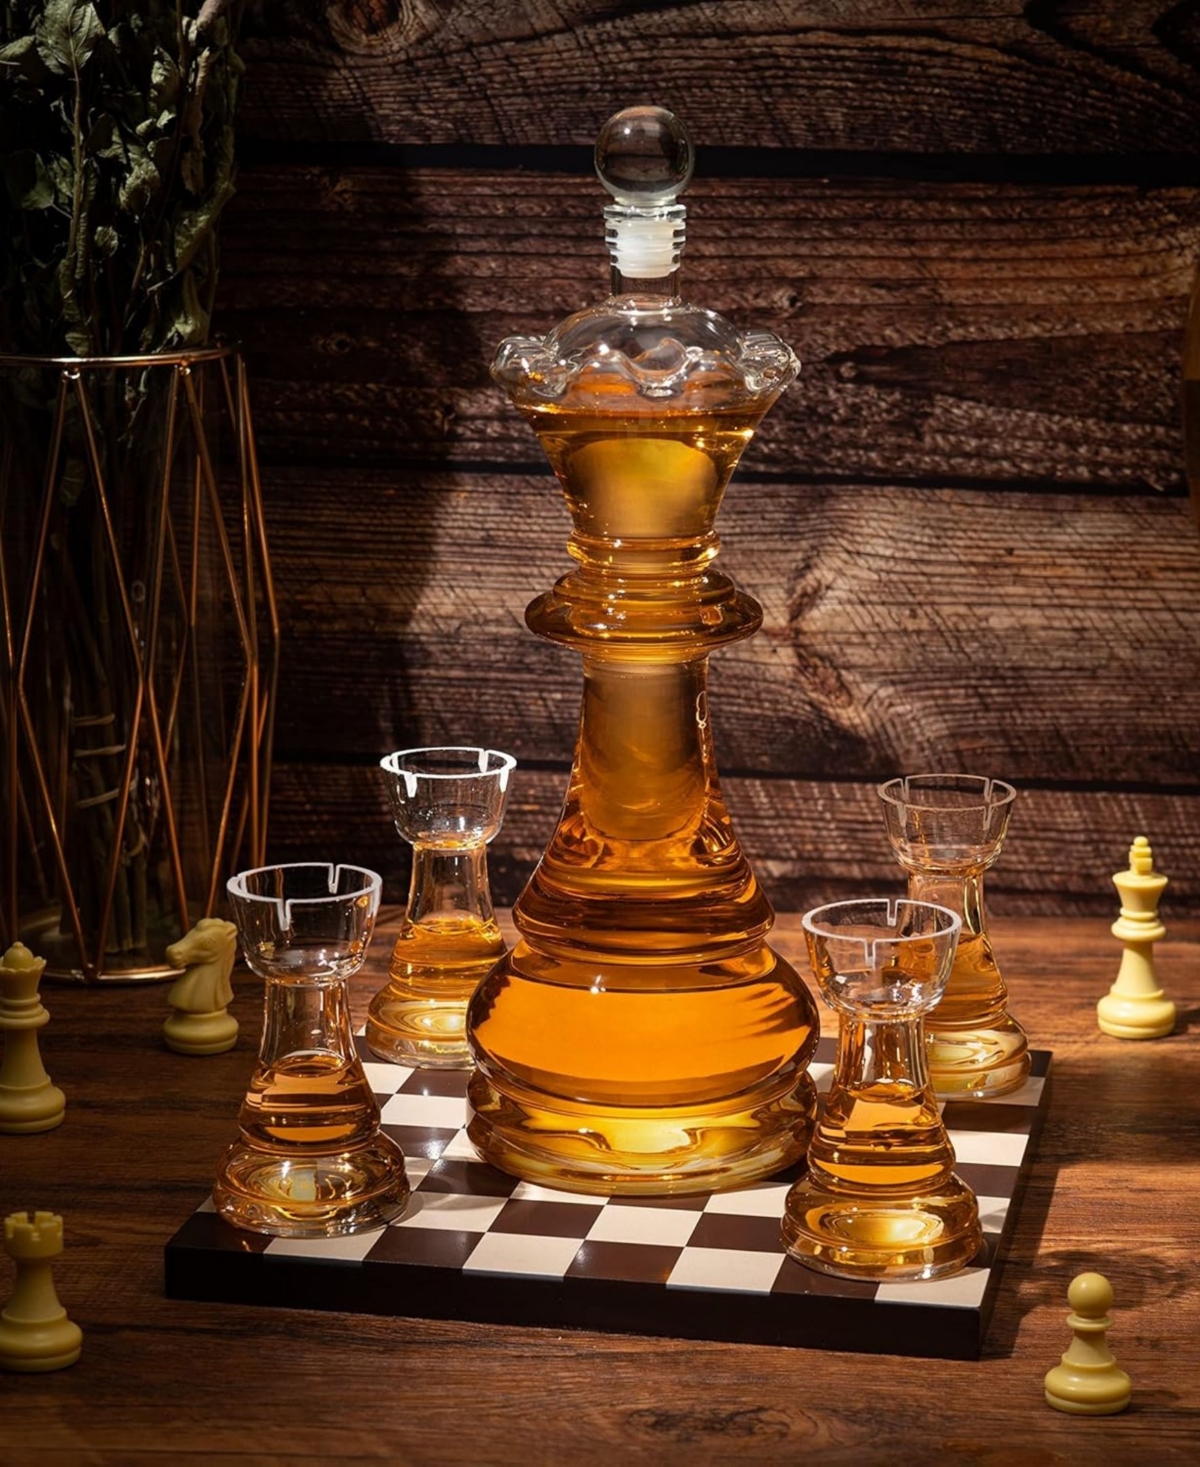 Shop The Wine Savant Chess Decanter, Set Of 5 In Clear